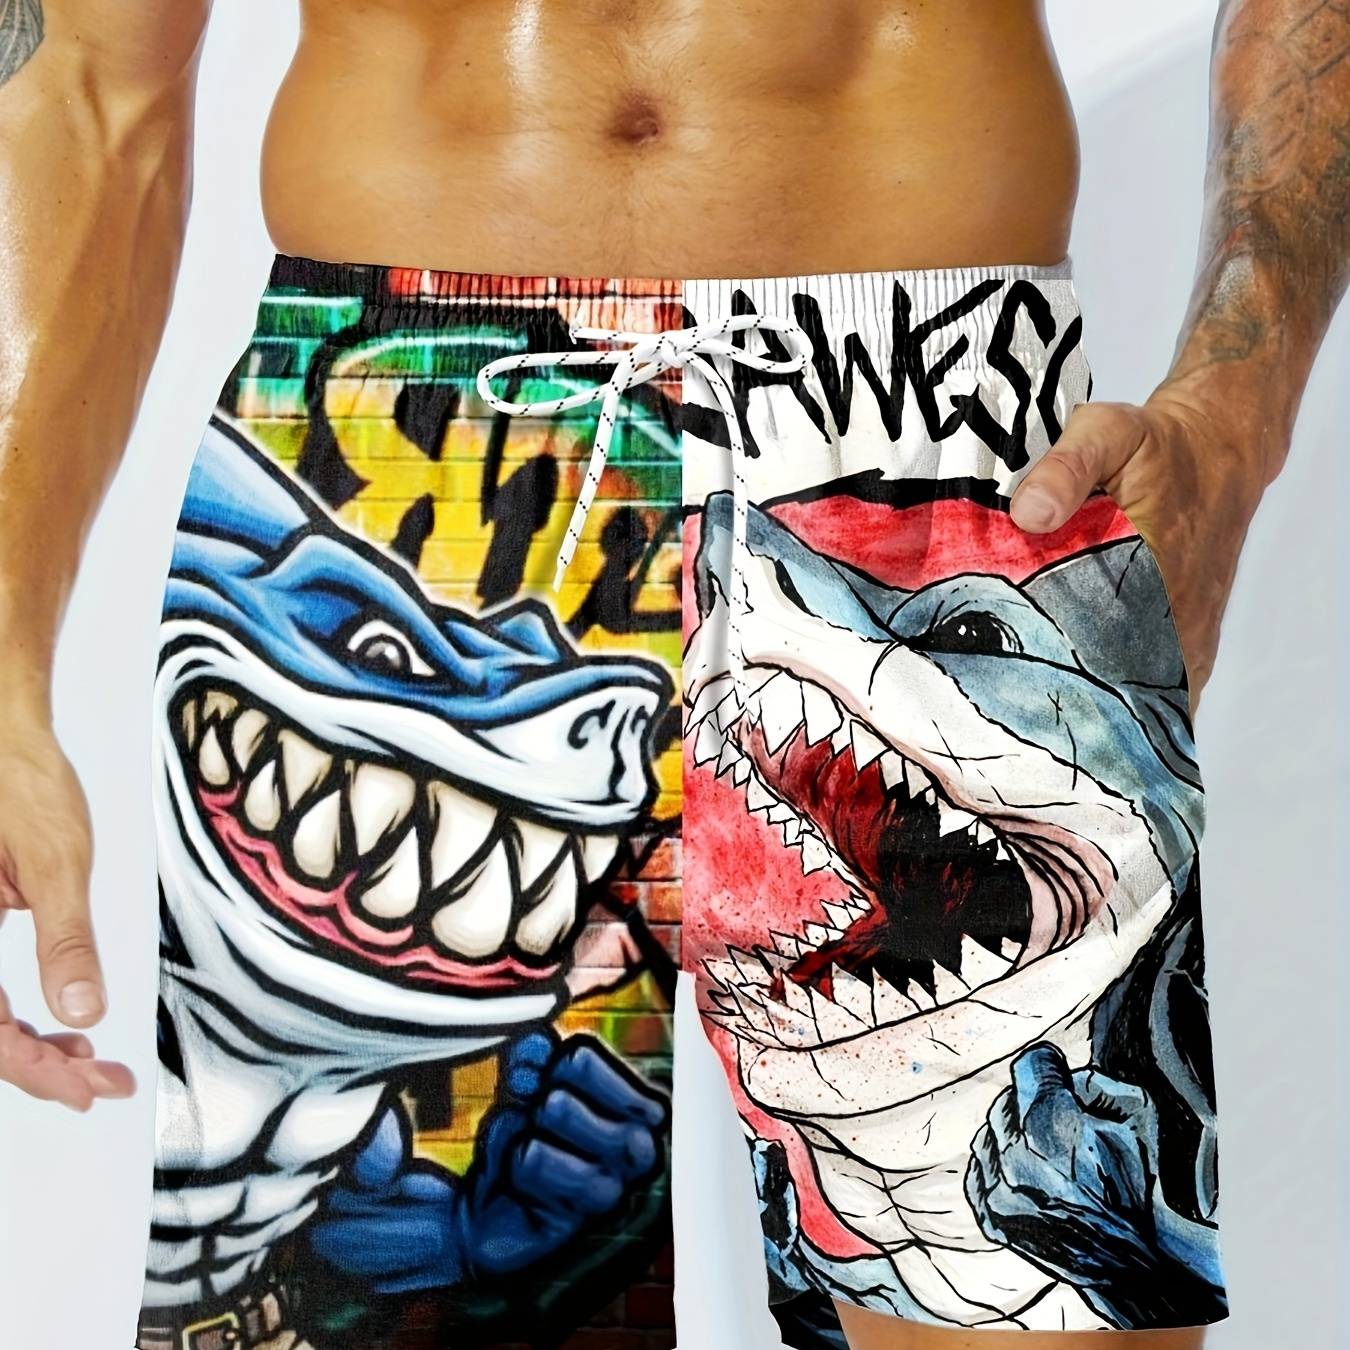 

Cartoon Style Shark Pattern Men's Board Shorts With Drawstring And Pockets, Stylish And Cool Shorts For Summer Beach Party And Holiday Wear